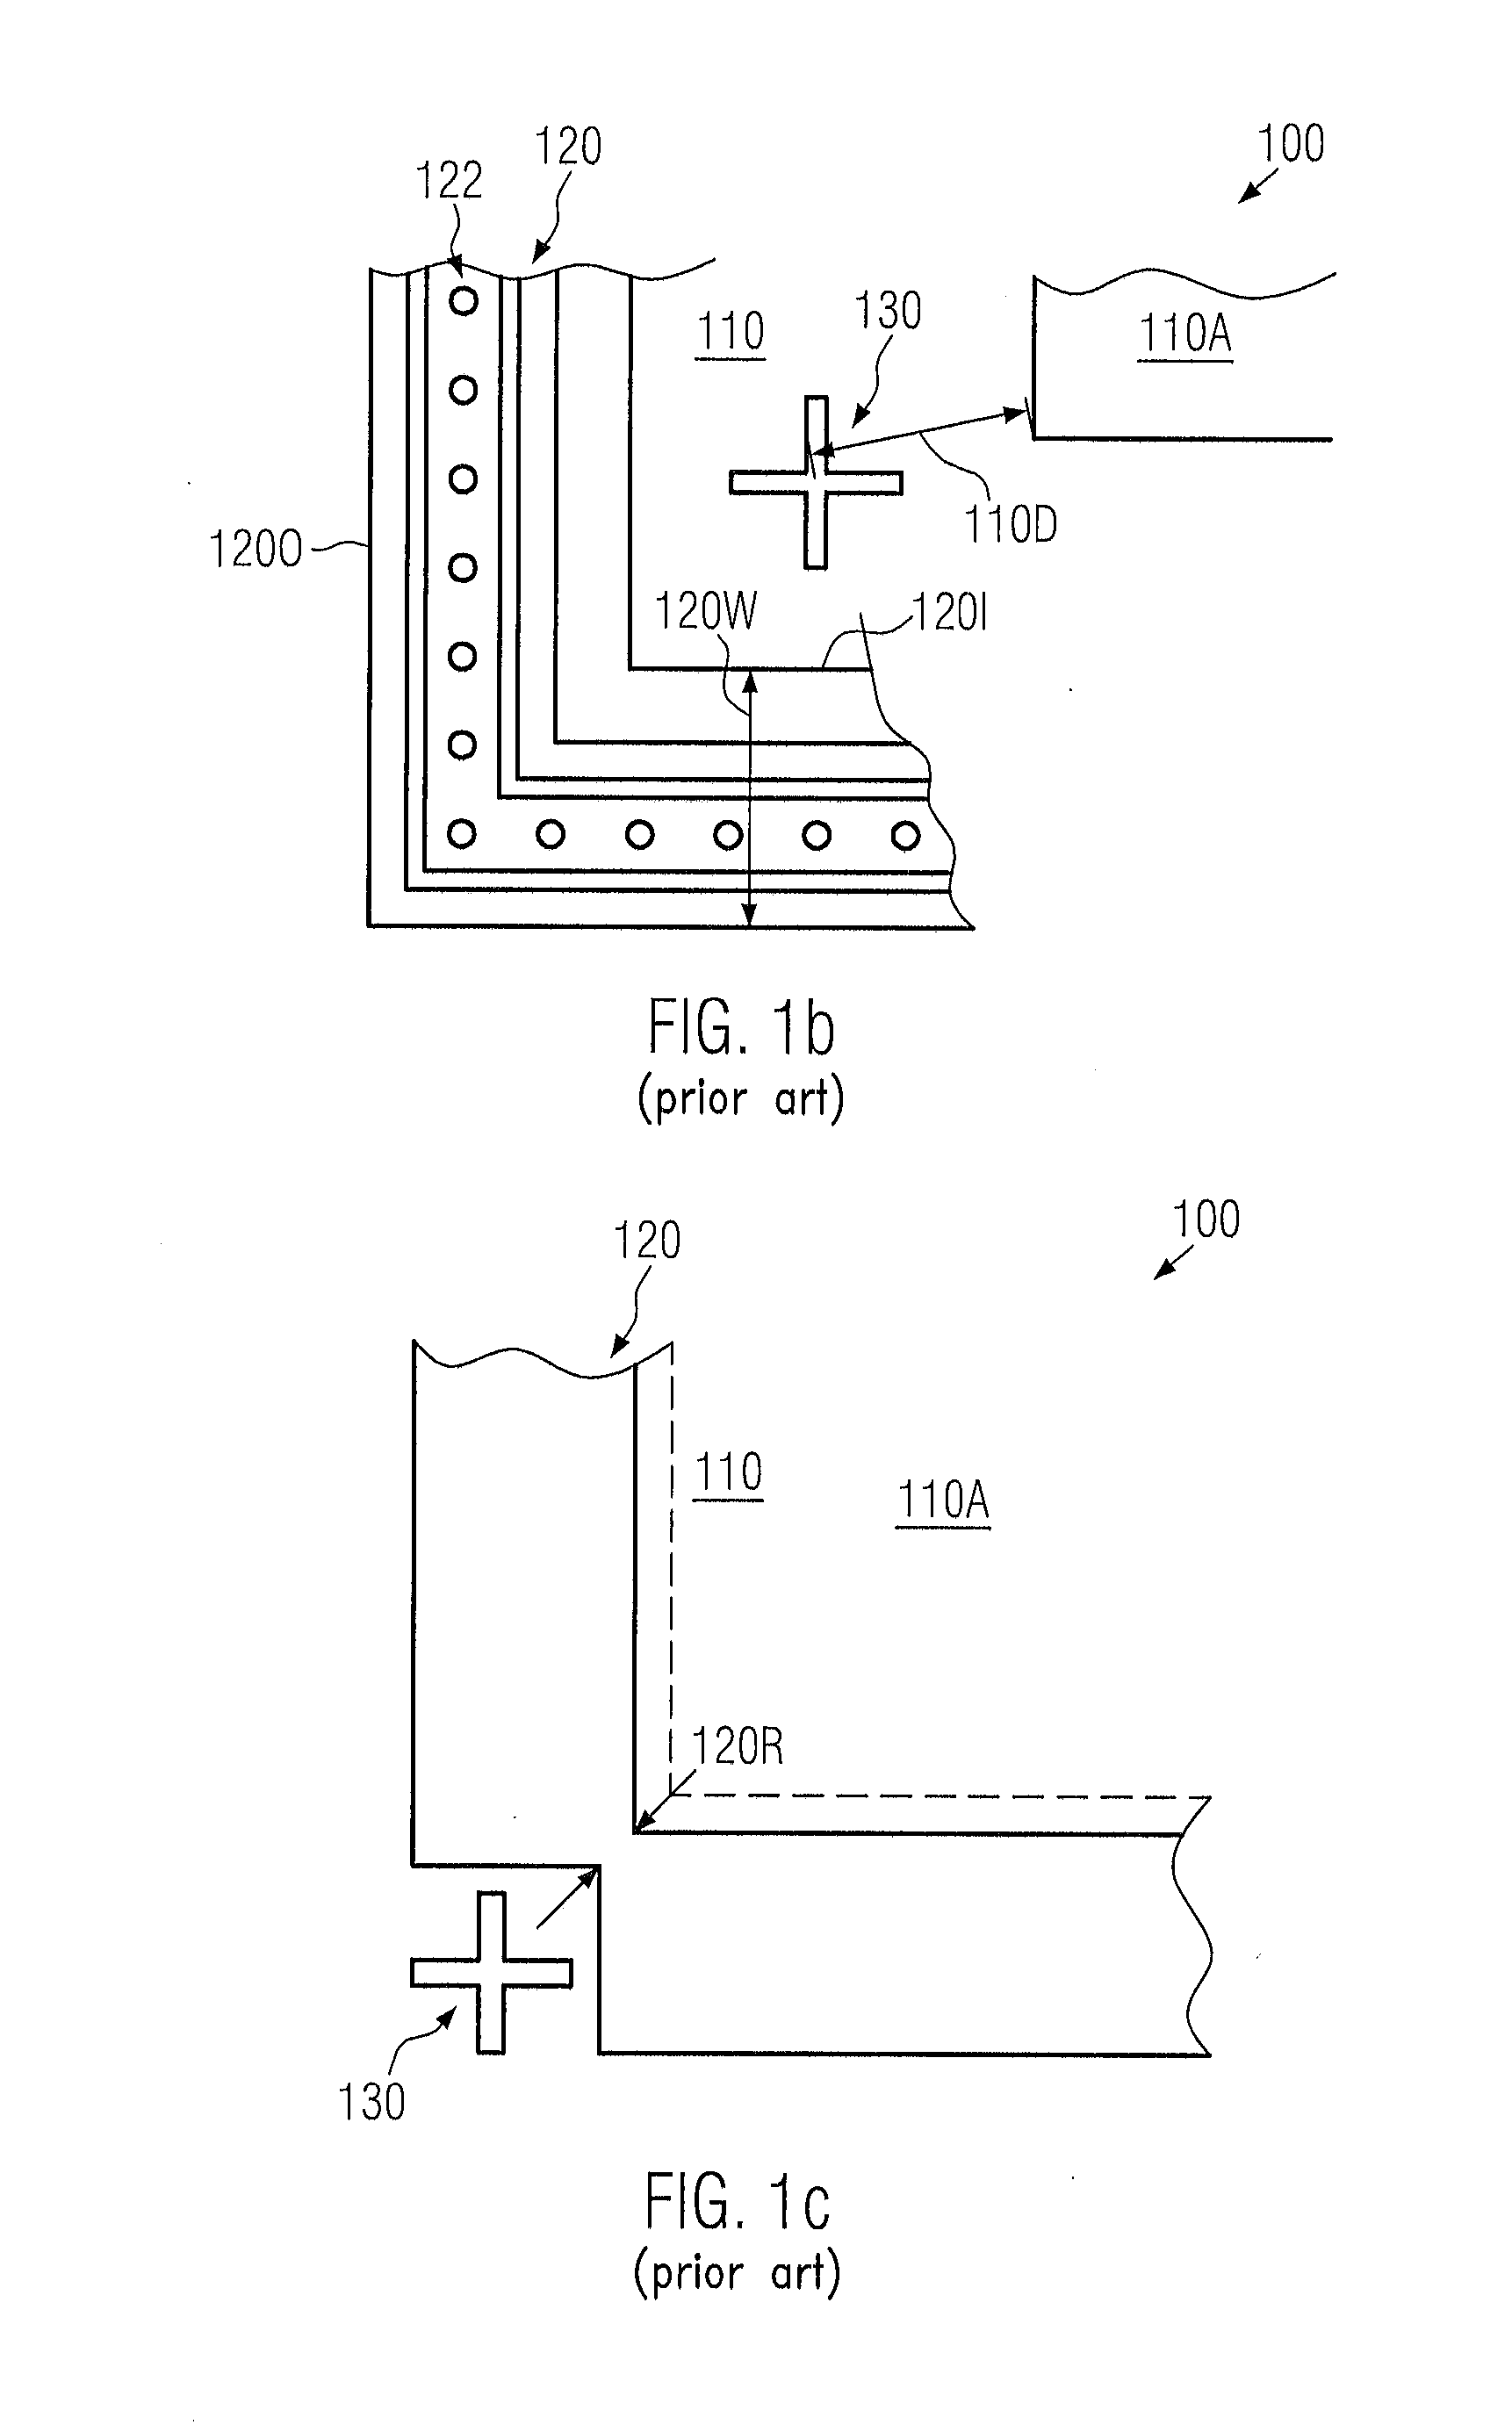 Semiconductor device comprising a die seal having an integrated alignment mark